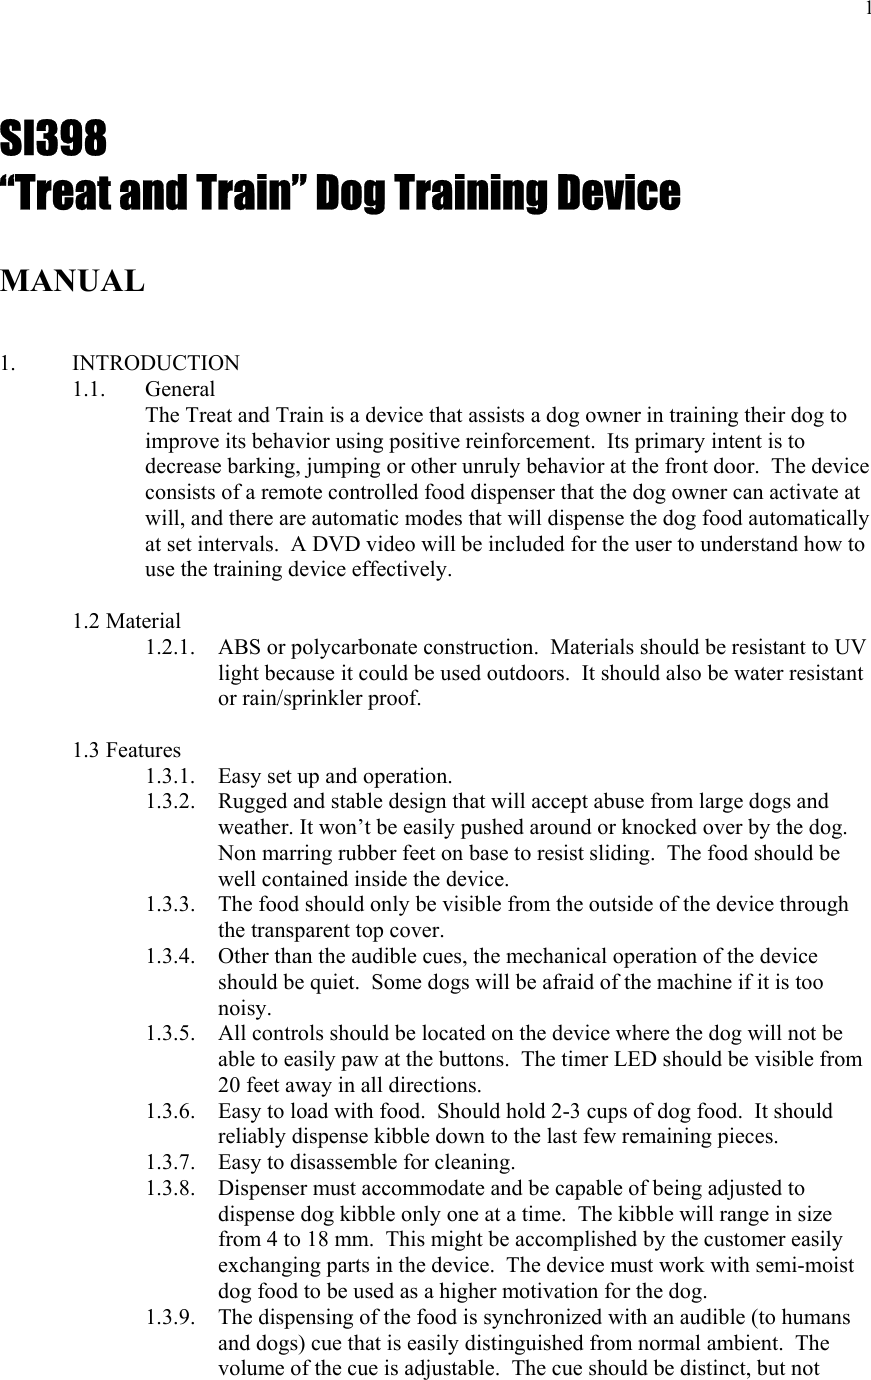  1        SI398 “Treat and Train” Dog Training Device  MANUAL    1. INTRODUCTION 1.1.   General The Treat and Train is a device that assists a dog owner in training their dog to improve its behavior using positive reinforcement.  Its primary intent is to decrease barking, jumping or other unruly behavior at the front door.  The device consists of a remote controlled food dispenser that the dog owner can activate at will, and there are automatic modes that will dispense the dog food automatically at set intervals.  A DVD video will be included for the user to understand how to use the training device effectively.   1.2 Material     1.2.1.   ABS or polycarbonate construction.  Materials should be resistant to UV light because it could be used outdoors.  It should also be water resistant or rain/sprinkler proof.    1.3 Features 1.3.1. Easy set up and operation. 1.3.2. Rugged and stable design that will accept abuse from large dogs and weather. It won’t be easily pushed around or knocked over by the dog.  Non marring rubber feet on base to resist sliding.  The food should be well contained inside the device. 1.3.3. The food should only be visible from the outside of the device through the transparent top cover. 1.3.4. Other than the audible cues, the mechanical operation of the device should be quiet.  Some dogs will be afraid of the machine if it is too noisy. 1.3.5. All controls should be located on the device where the dog will not be able to easily paw at the buttons.  The timer LED should be visible from 20 feet away in all directions. 1.3.6. Easy to load with food.  Should hold 2-3 cups of dog food.  It should reliably dispense kibble down to the last few remaining pieces. 1.3.7. Easy to disassemble for cleaning. 1.3.8. Dispenser must accommodate and be capable of being adjusted to dispense dog kibble only one at a time.  The kibble will range in size from 4 to 18 mm.  This might be accomplished by the customer easily exchanging parts in the device.  The device must work with semi-moist dog food to be used as a higher motivation for the dog. 1.3.9. The dispensing of the food is synchronized with an audible (to humans and dogs) cue that is easily distinguished from normal ambient.  The volume of the cue is adjustable.  The cue should be distinct, but not 